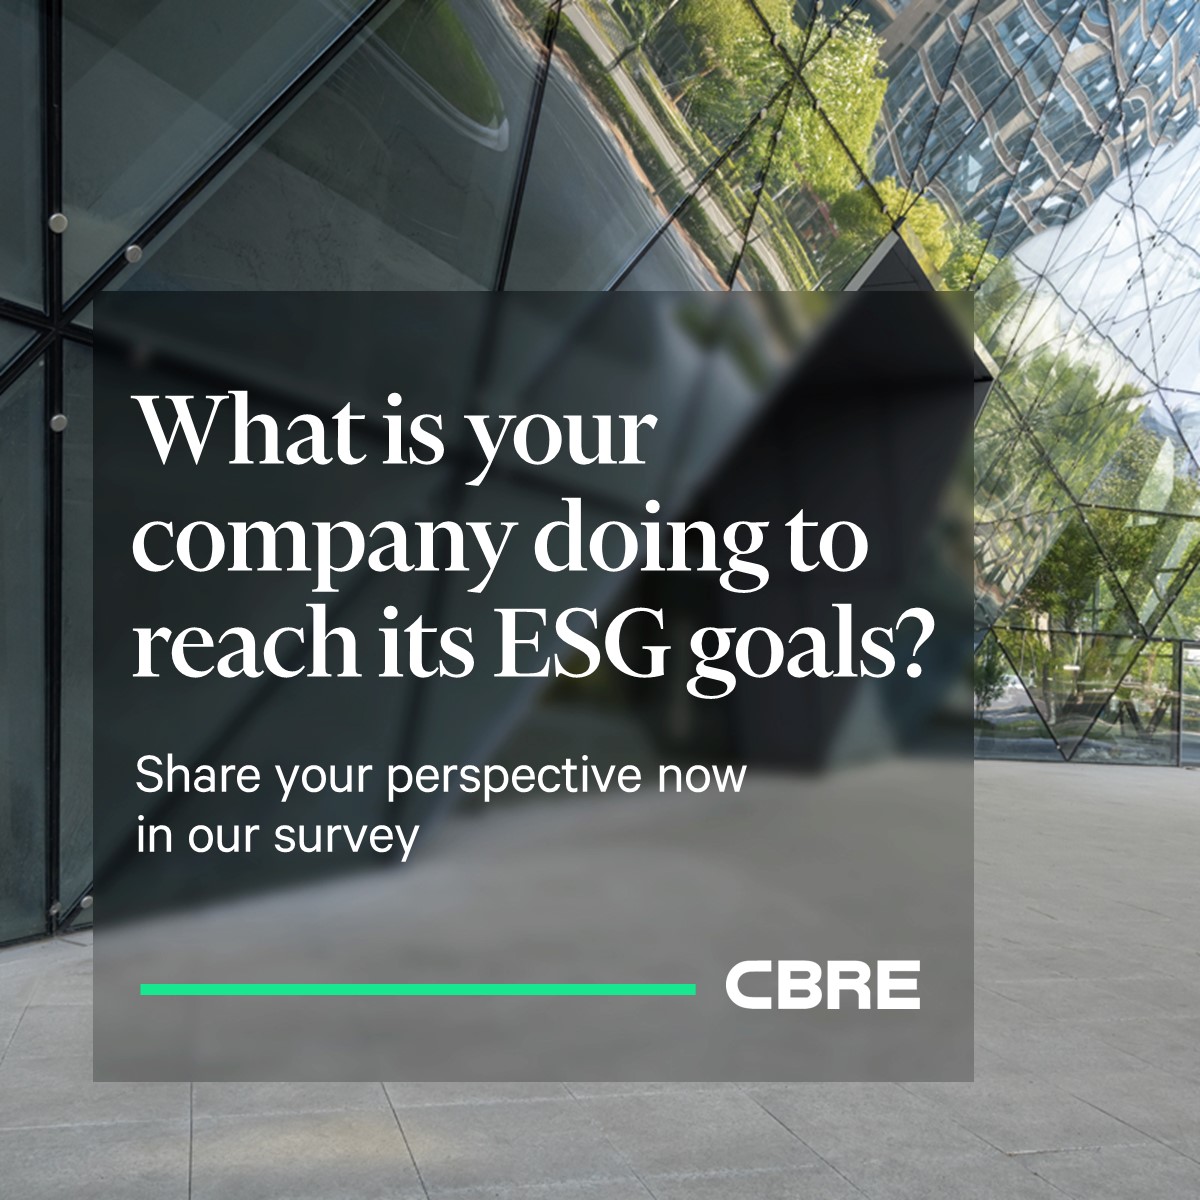 We need your perspective on ESG issues affecting real estate, as the industry looks to make progress on pressing climate and social equity challenges. Complete our Global ESG & Real Estate Survey now cbre.co/3SaC2QJ